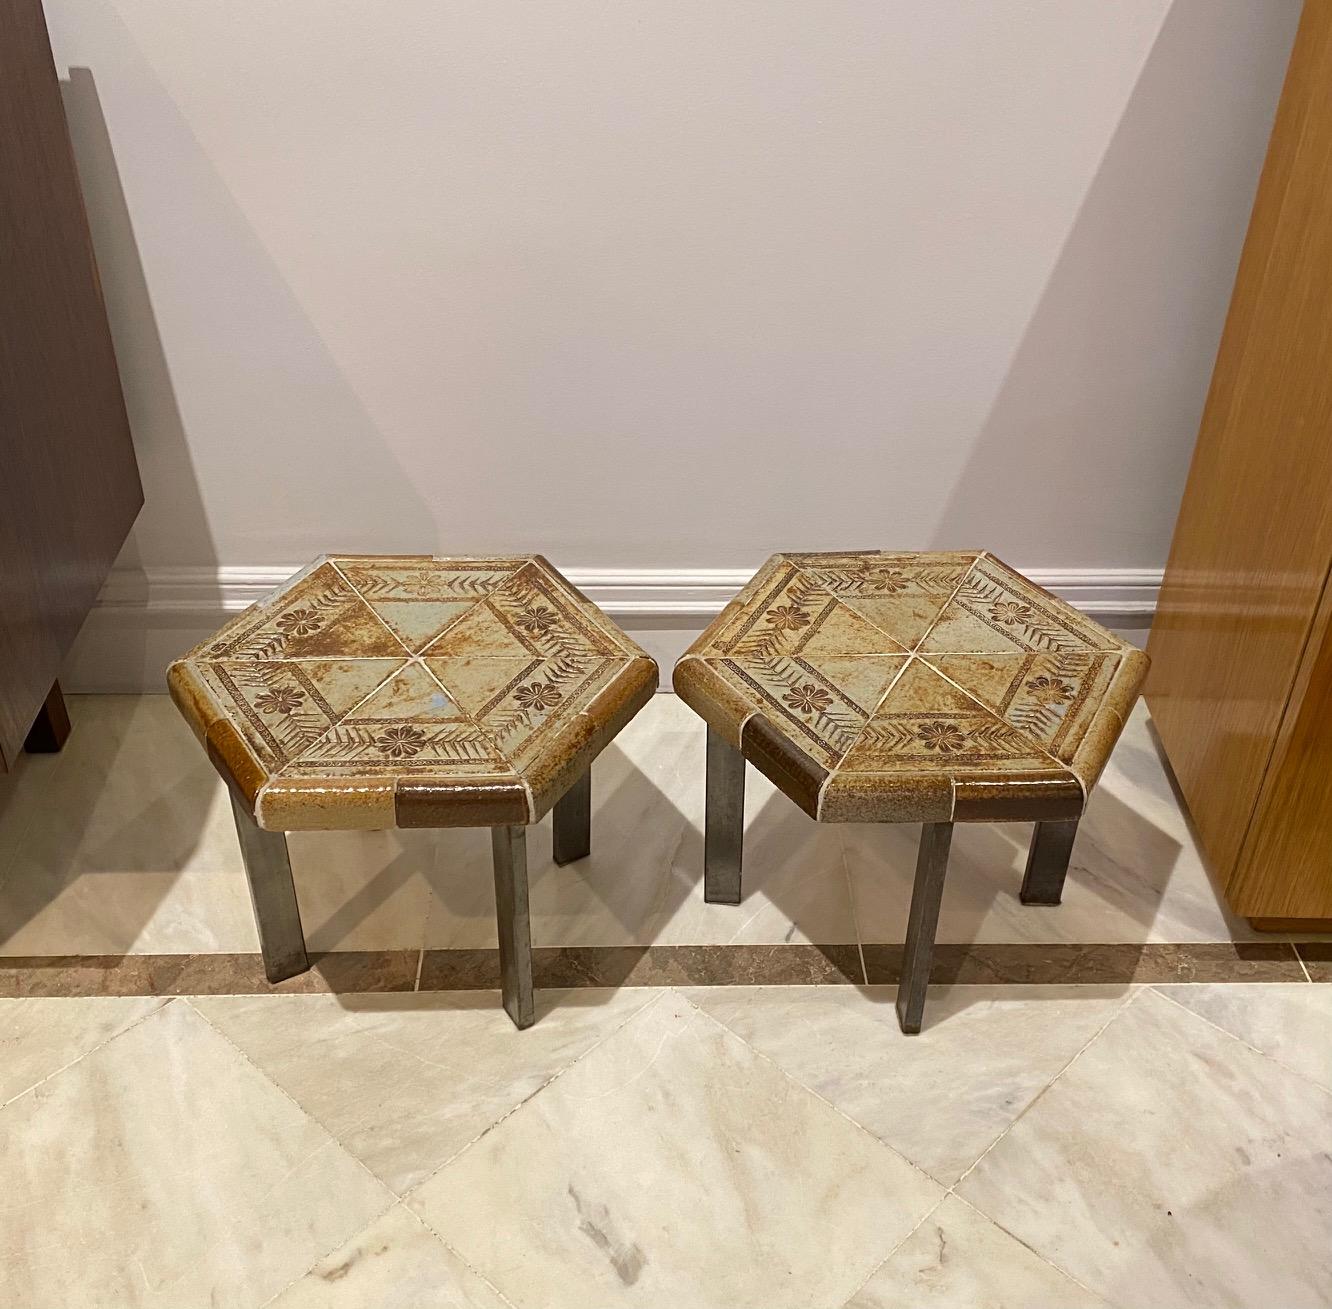 Roger Capron Pair of Small Ceramic Side Tables 1960s For Sale 2